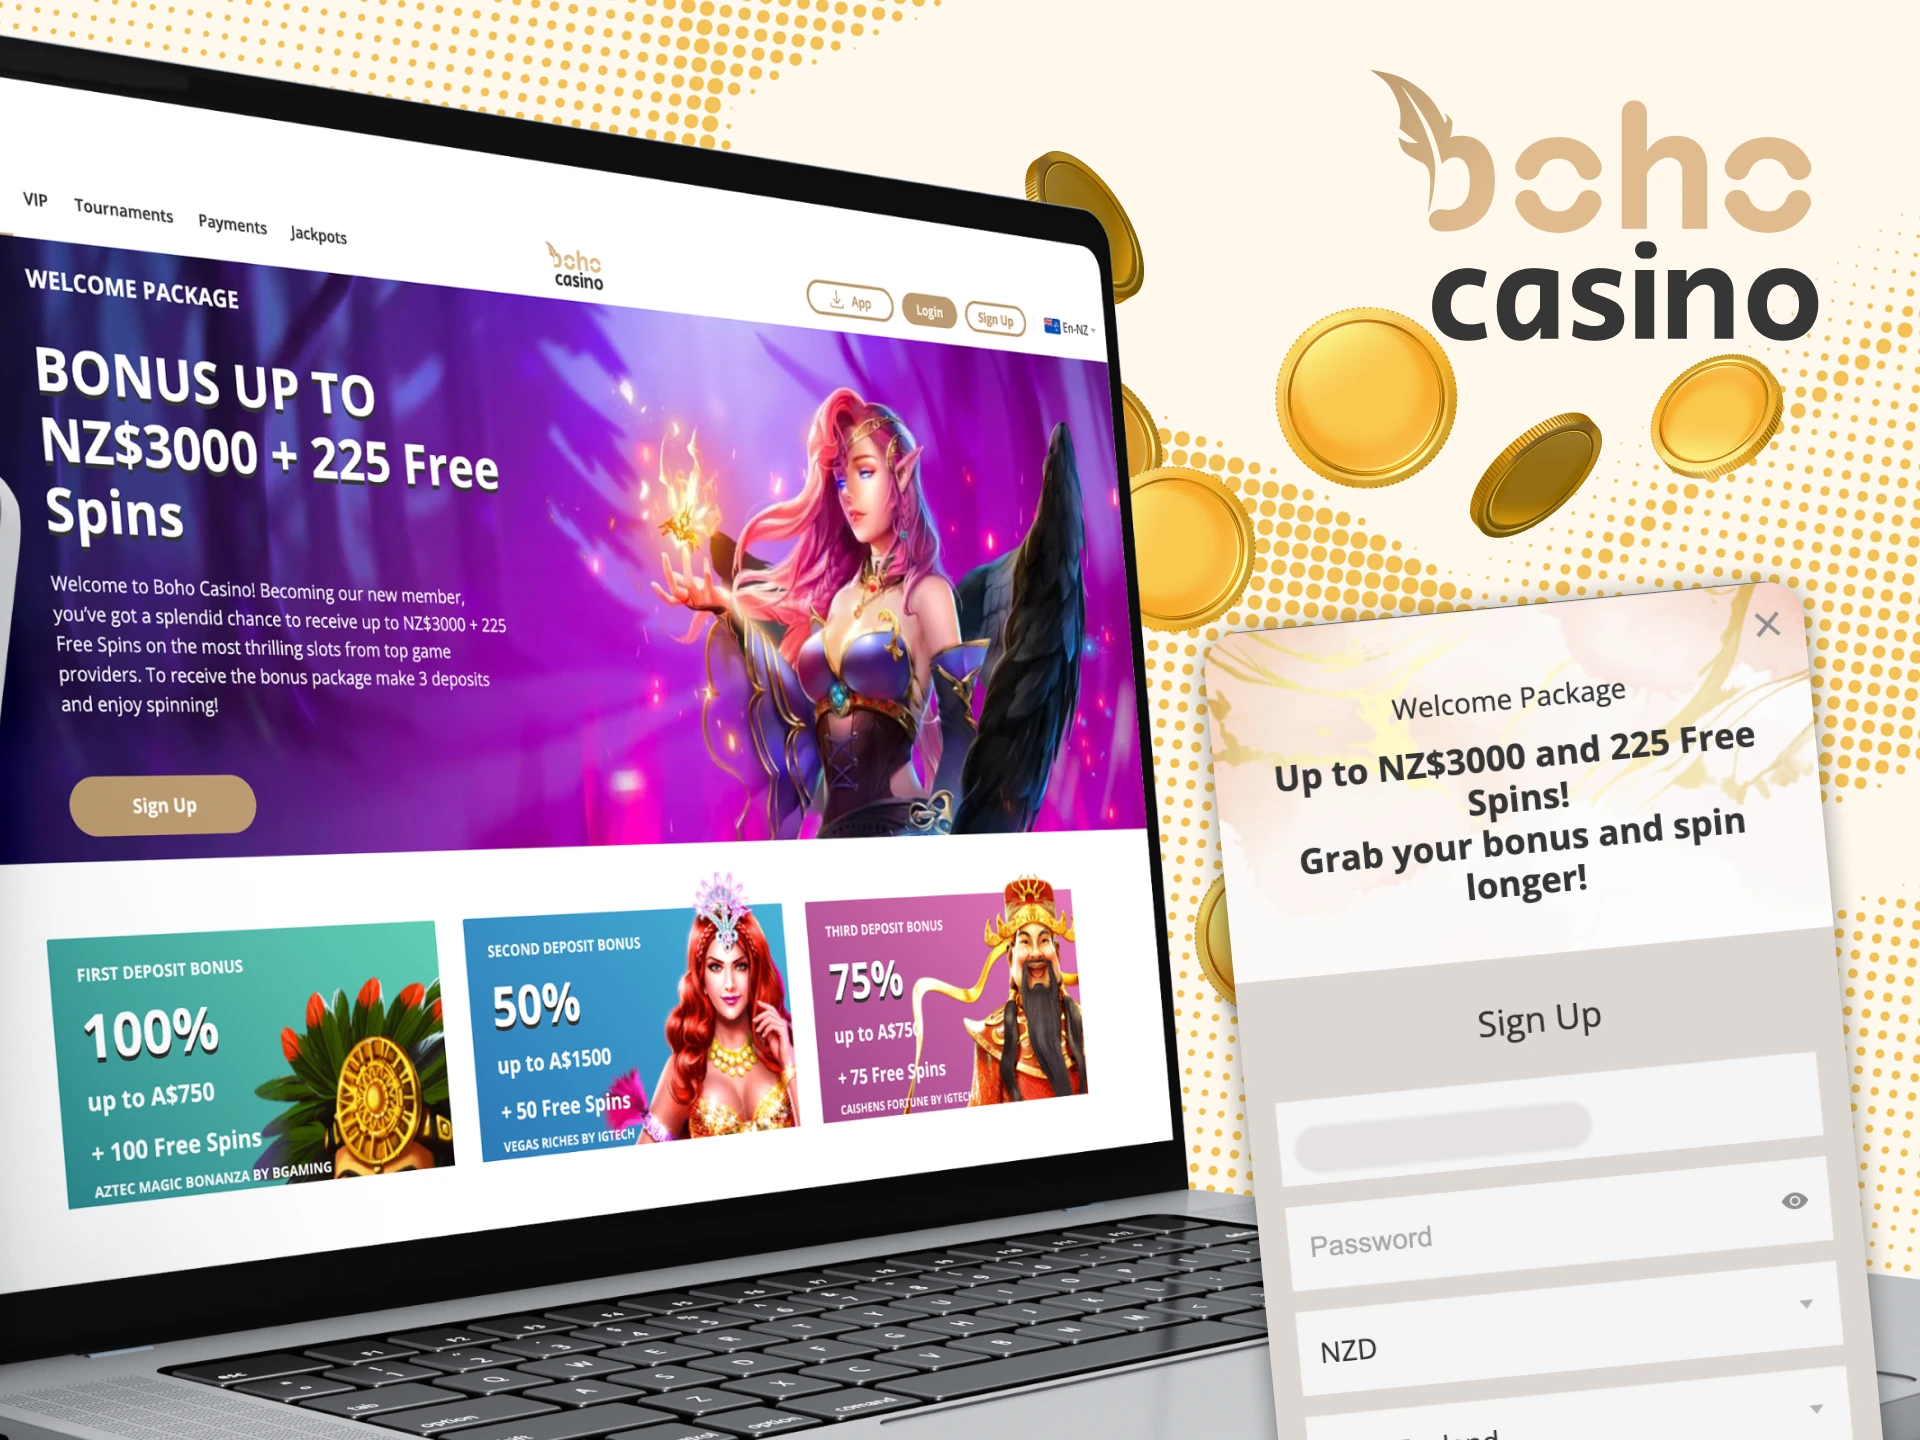 Boho Casino bonus code gives you a chance to win a much bigger prize.